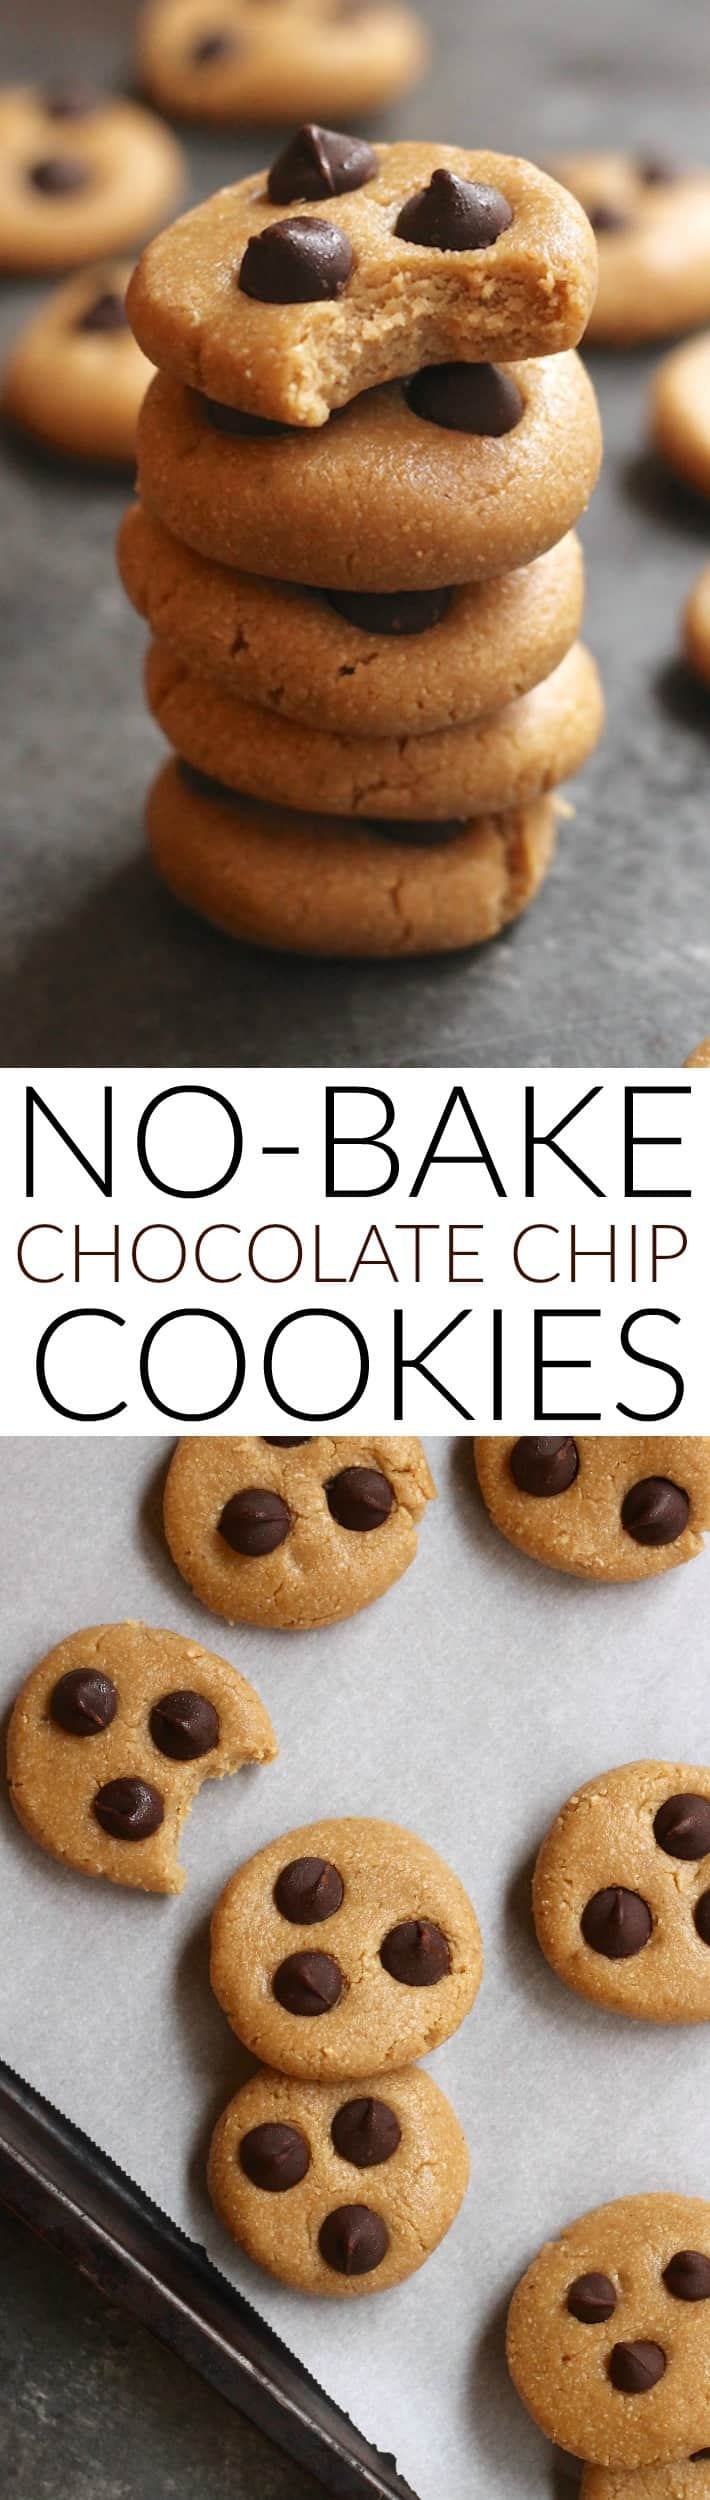 No Bake Cookies With Chocolate Chips
 No Bake Chocolate Chip Cookies